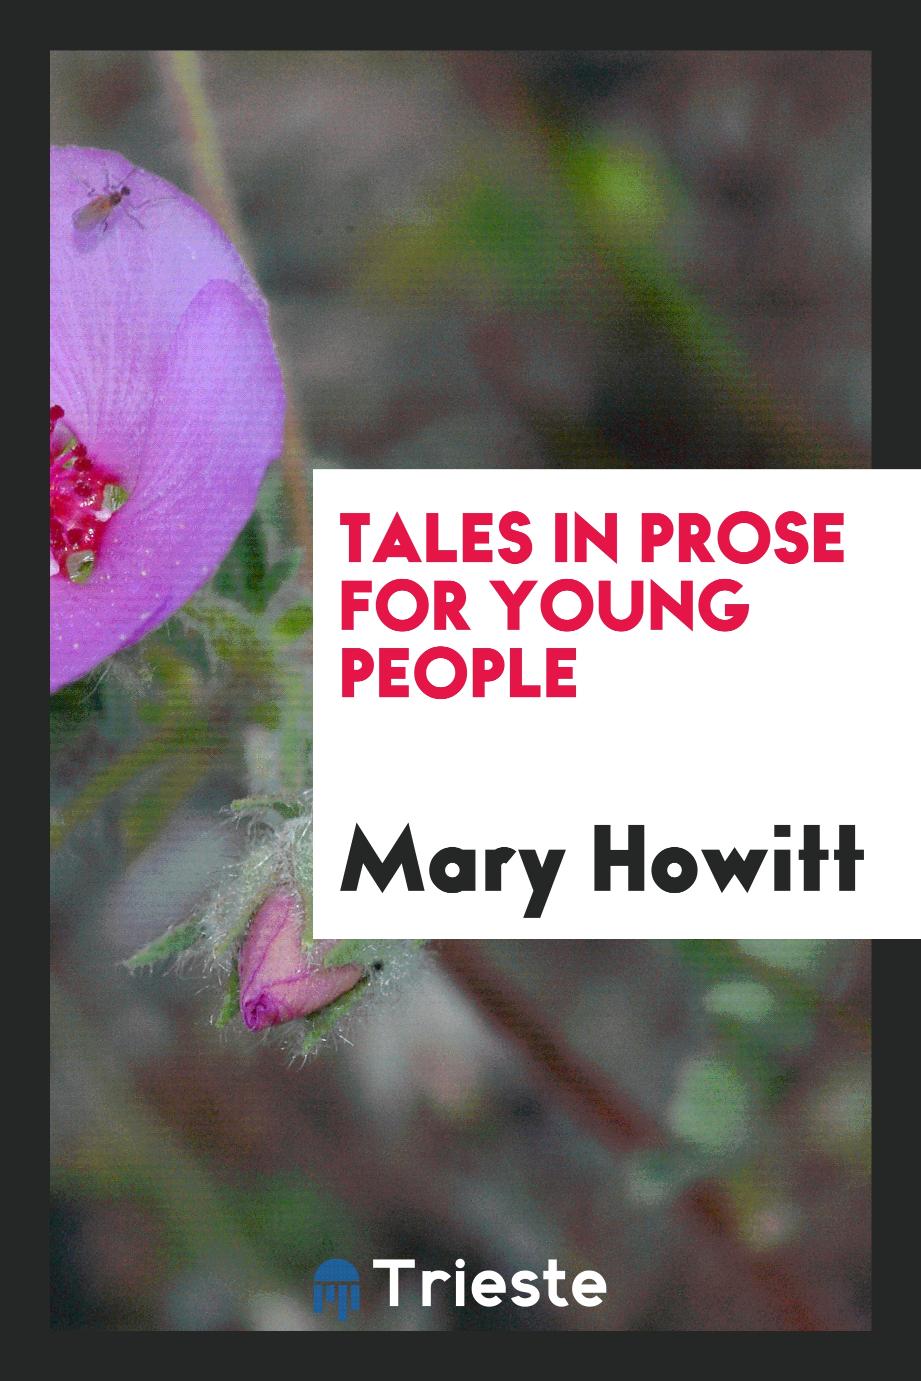 Tales in prose for young people